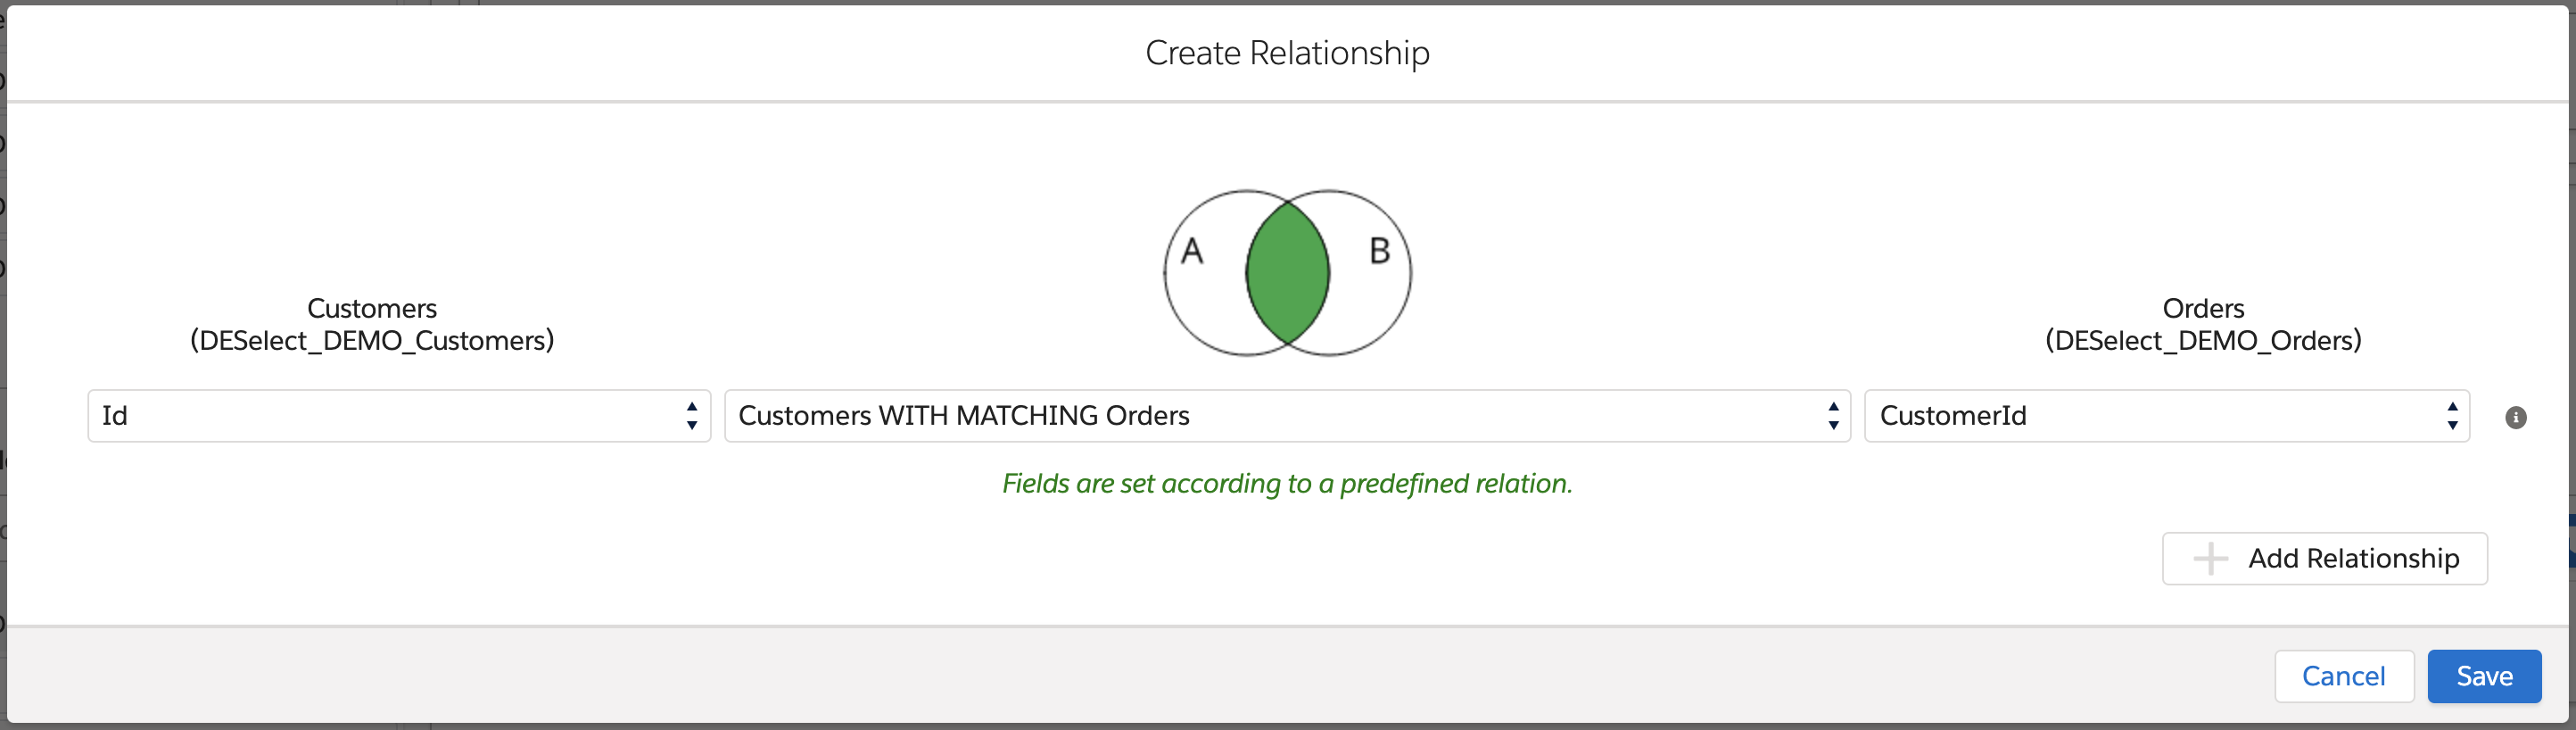 JOIN representation for predefined relations in DESelect